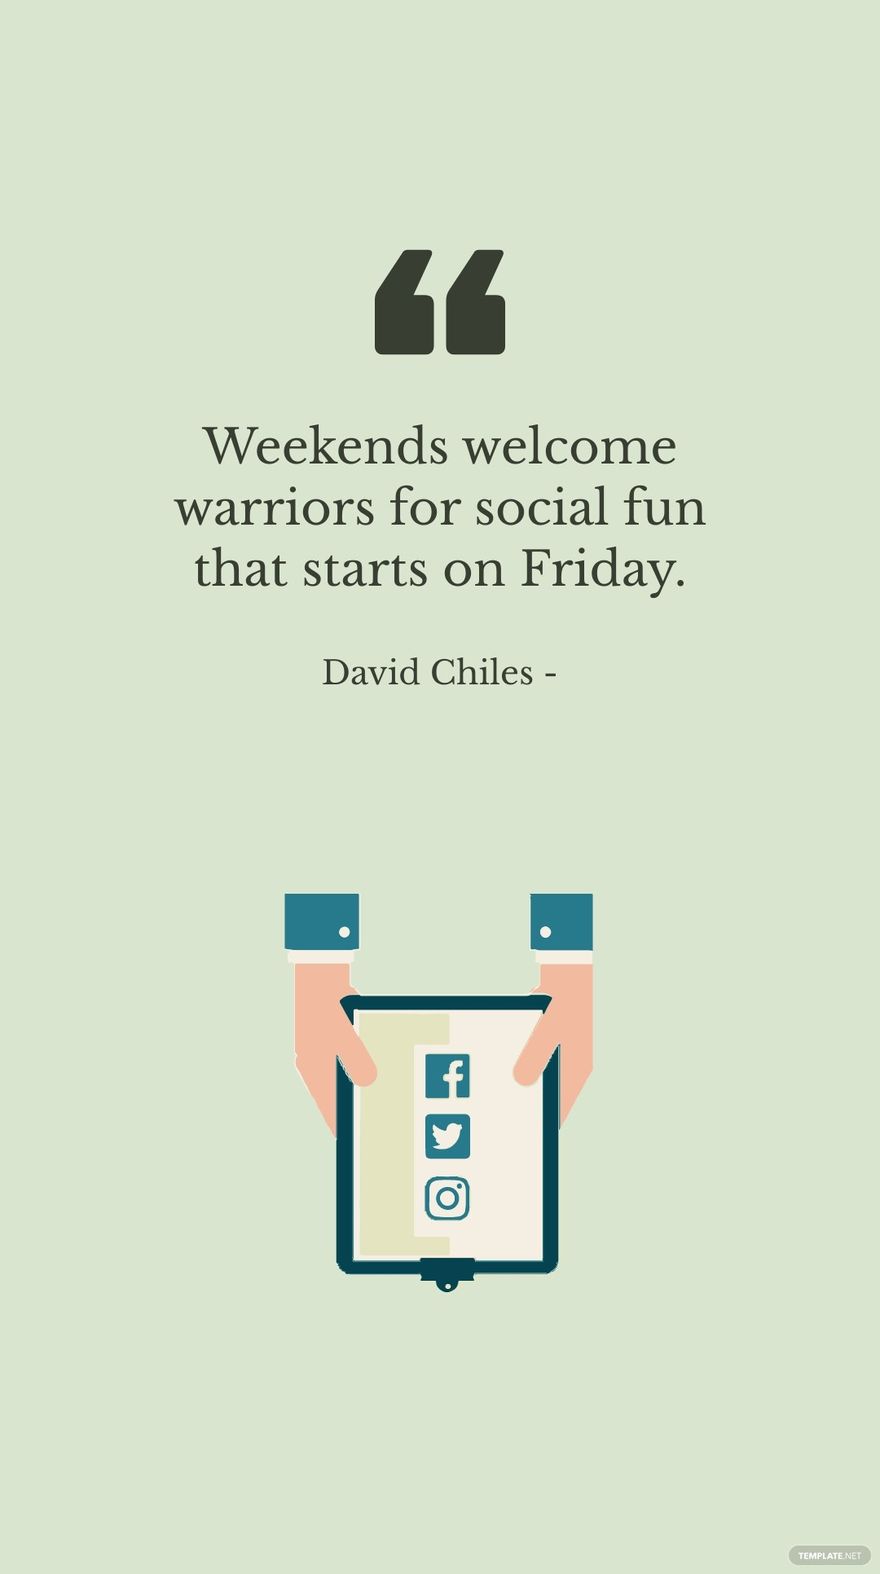 Free David Chiles - Weekends welcome warriors for social fun that starts on Friday. in JPG